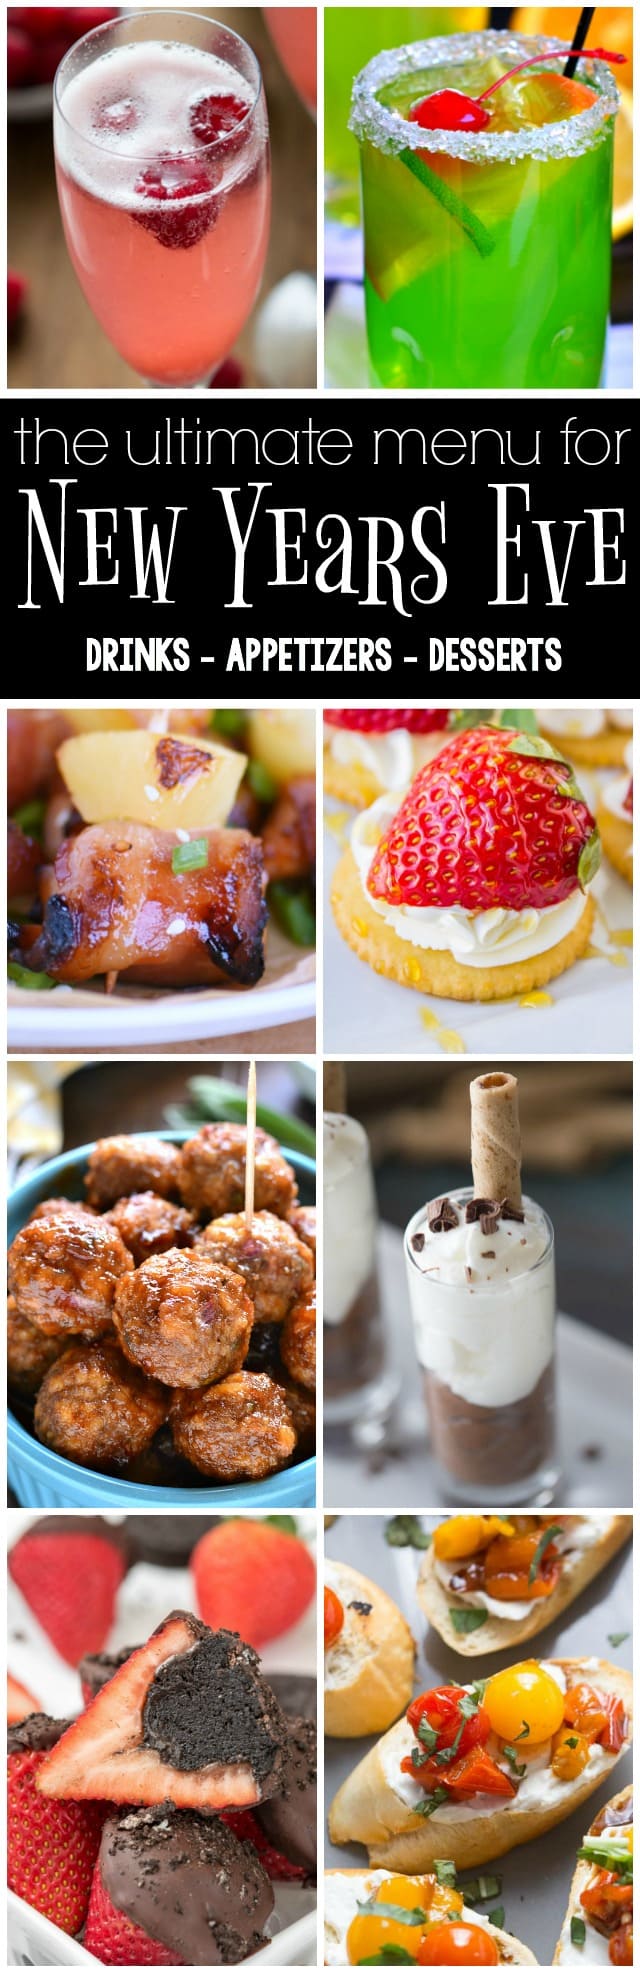 Ultimate New Year's Eve Menu - From drinks to appetizers that will satisfy everyone, and desserts for every taste, this is the ultimate New Year's Eve party menu!